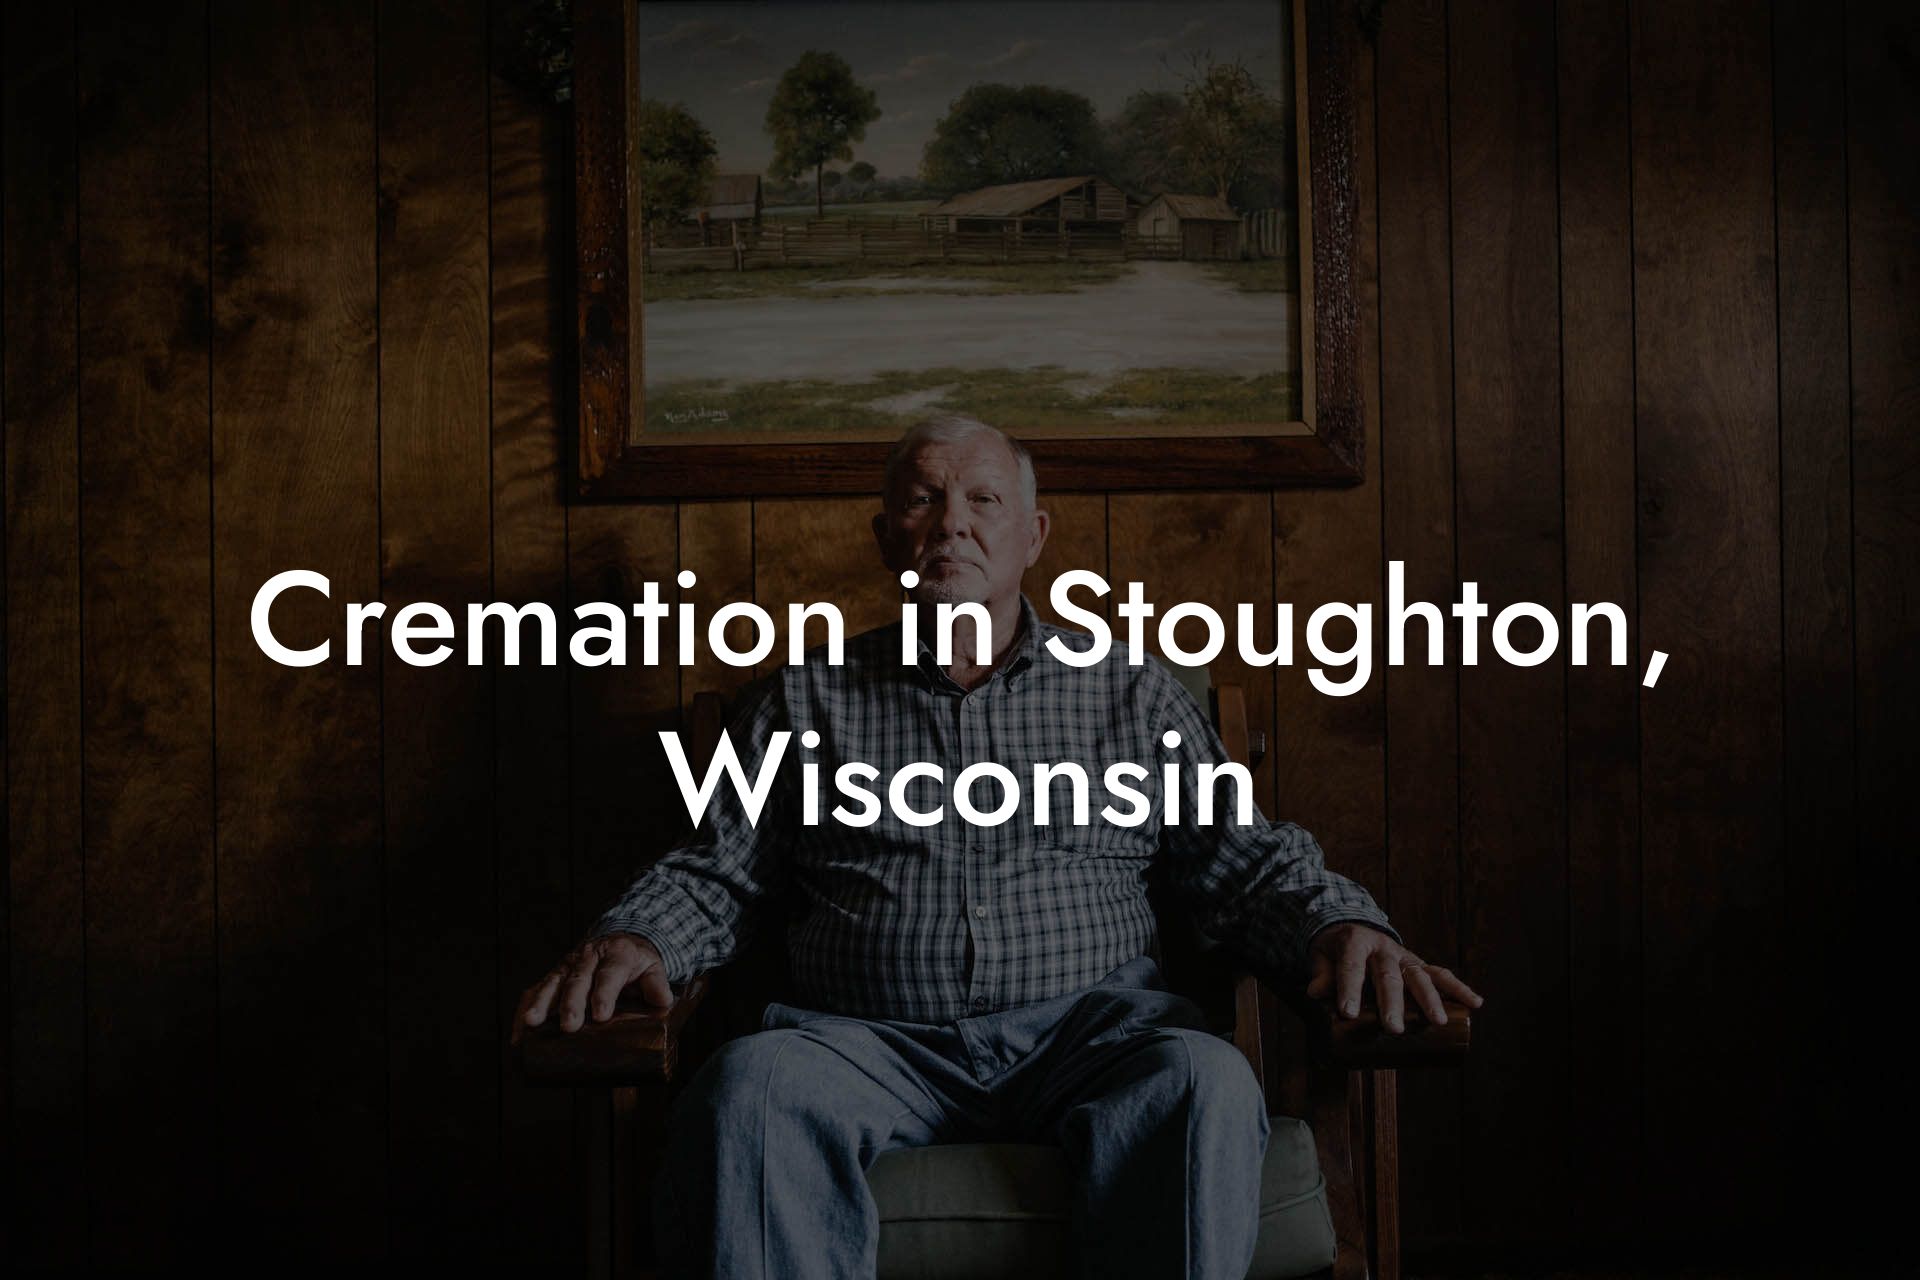 Cremation in Stoughton, Wisconsin